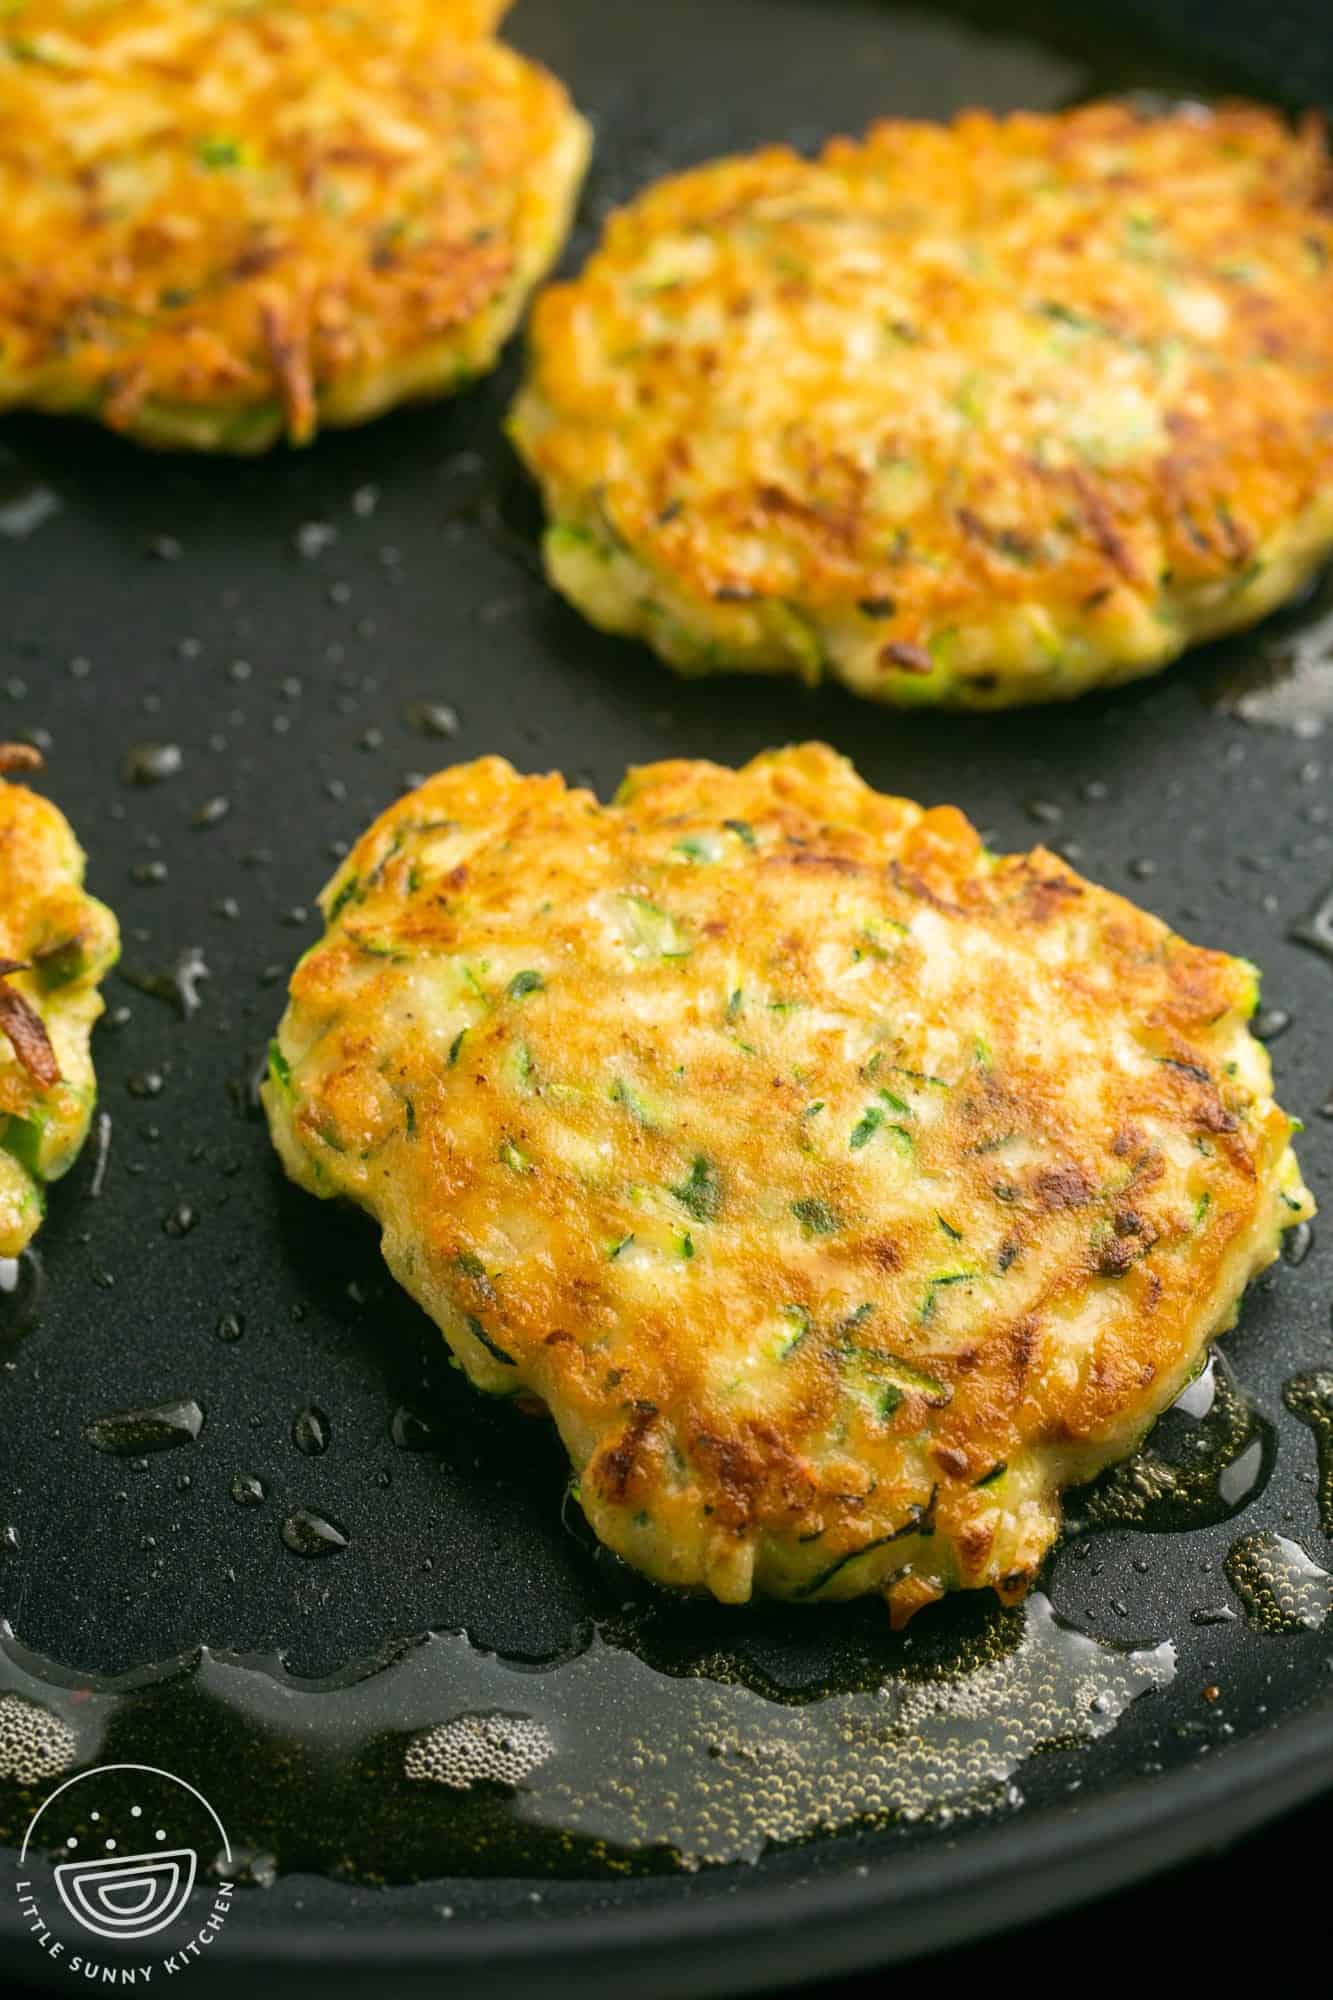 Zucchini fritters frying in a non-stick pan.